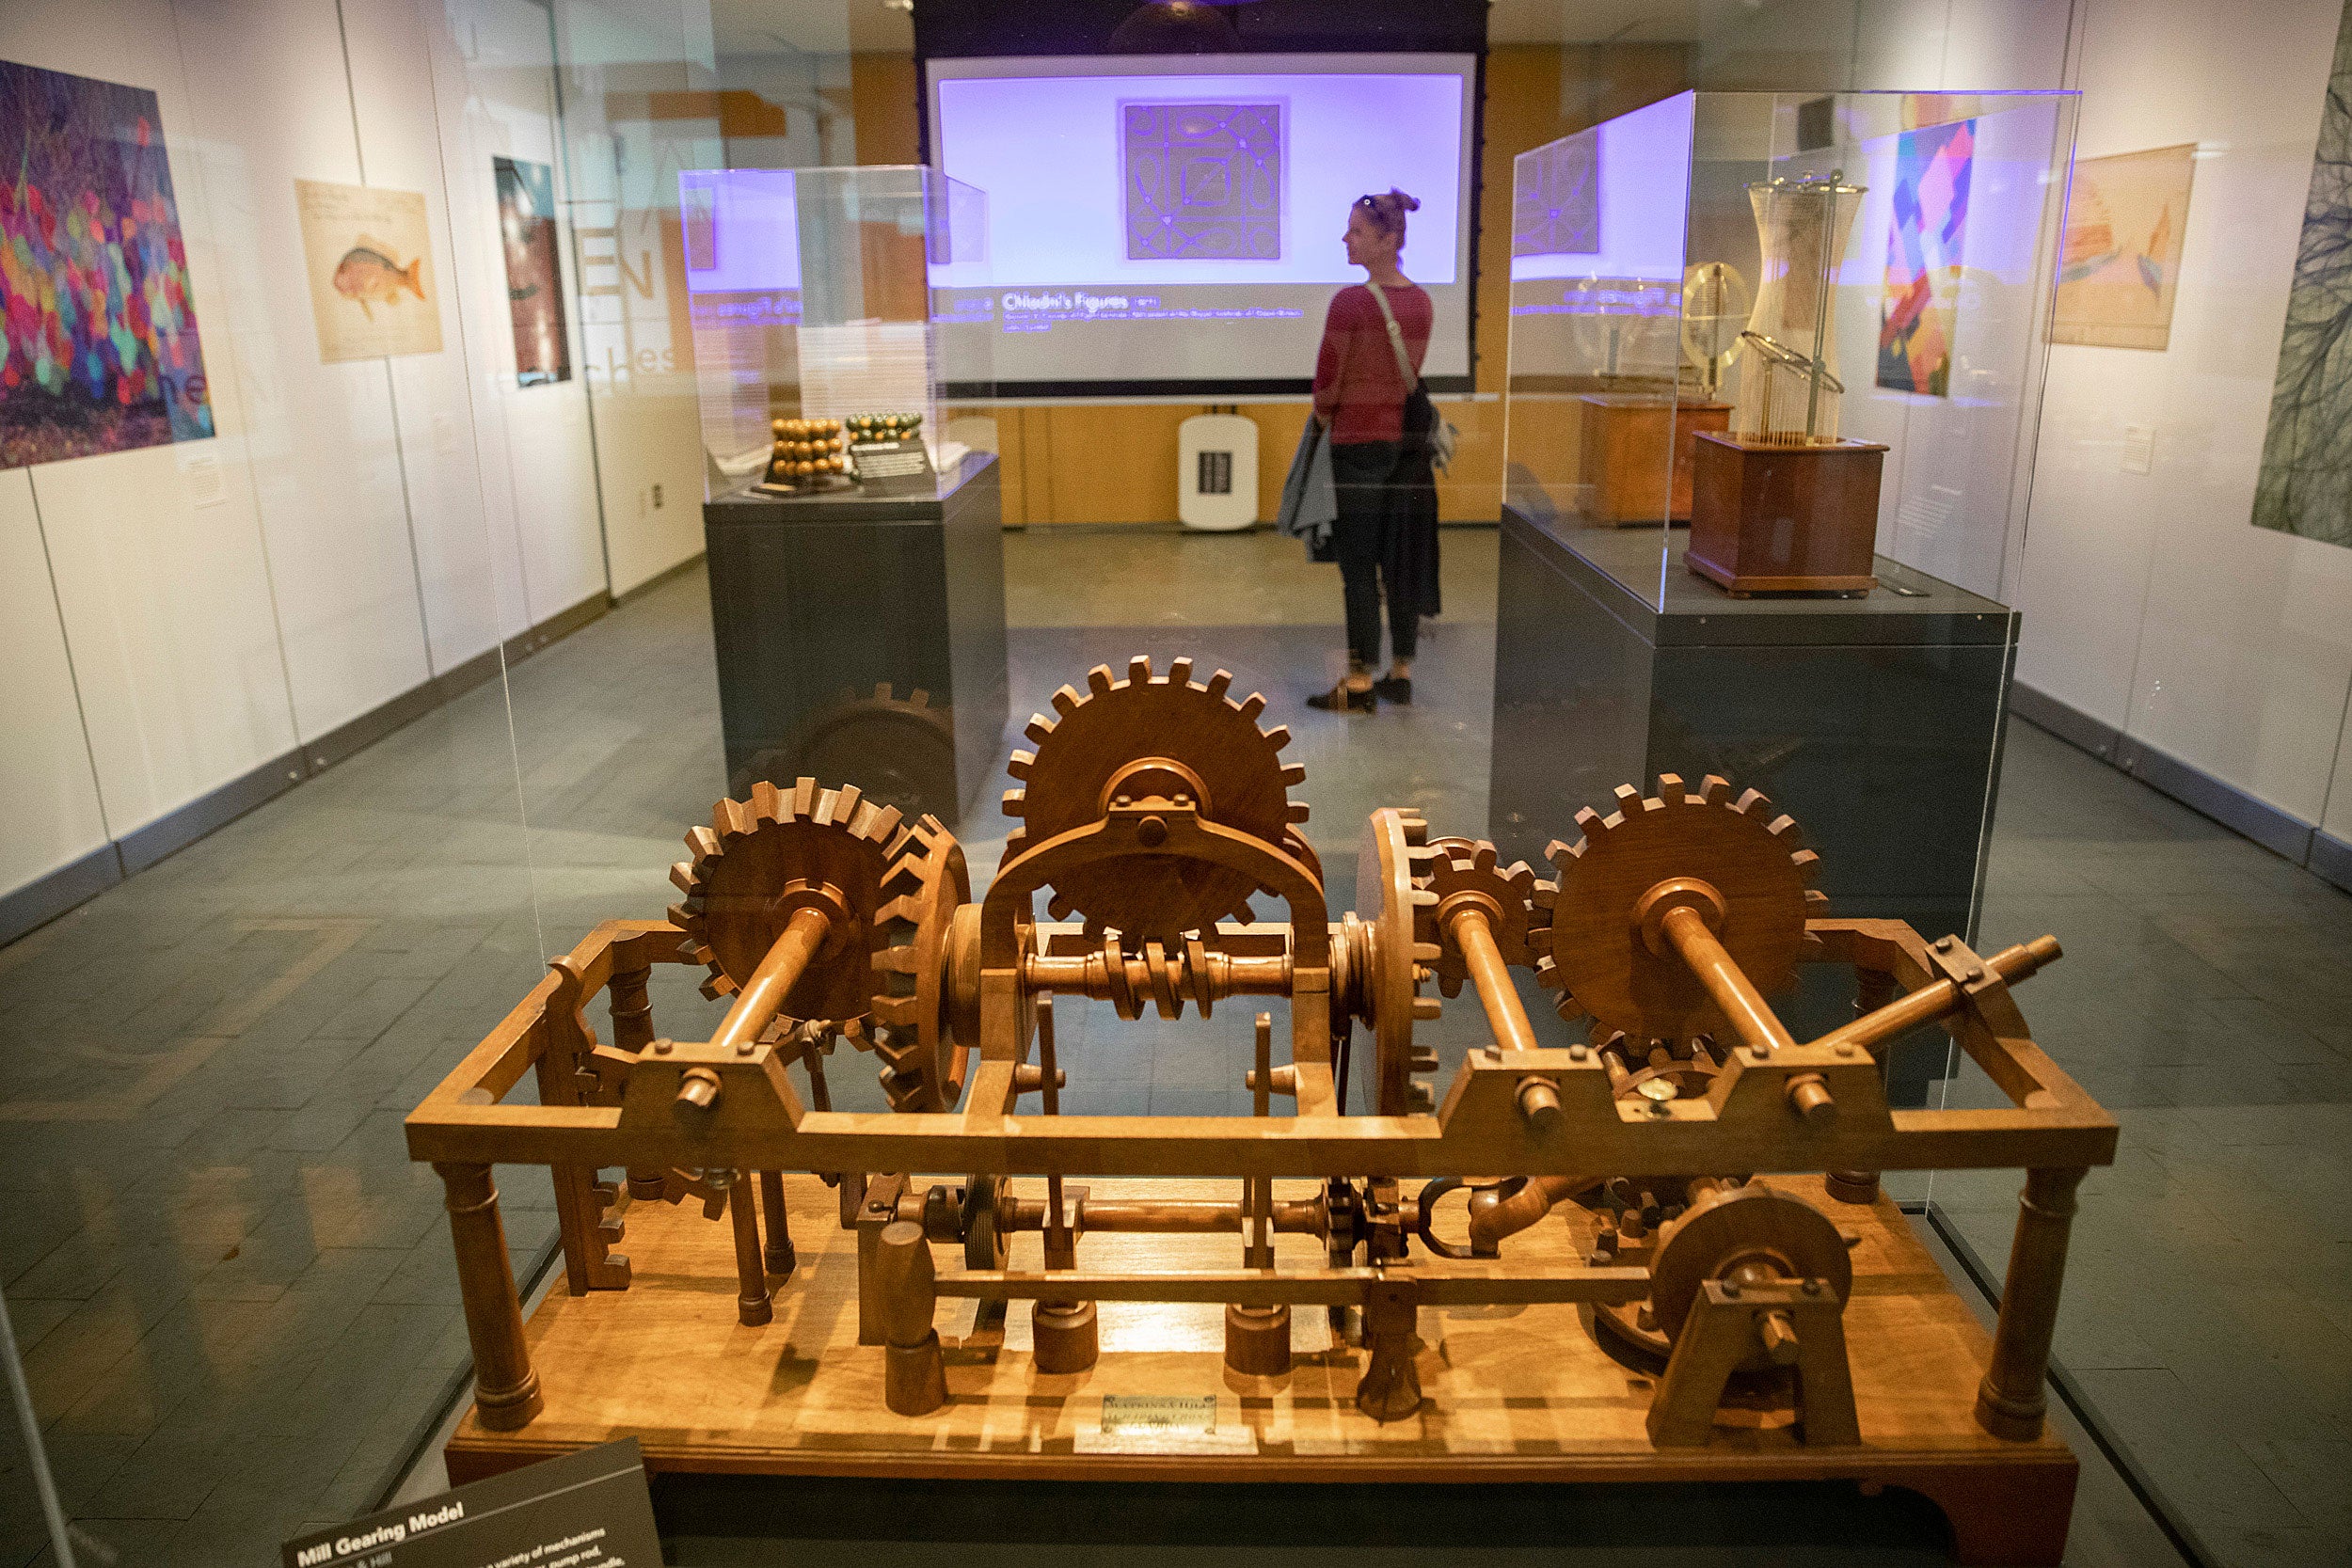 13. Harvard students learned mechanics from this wooden model of interlocking gears that was deployed in mills.